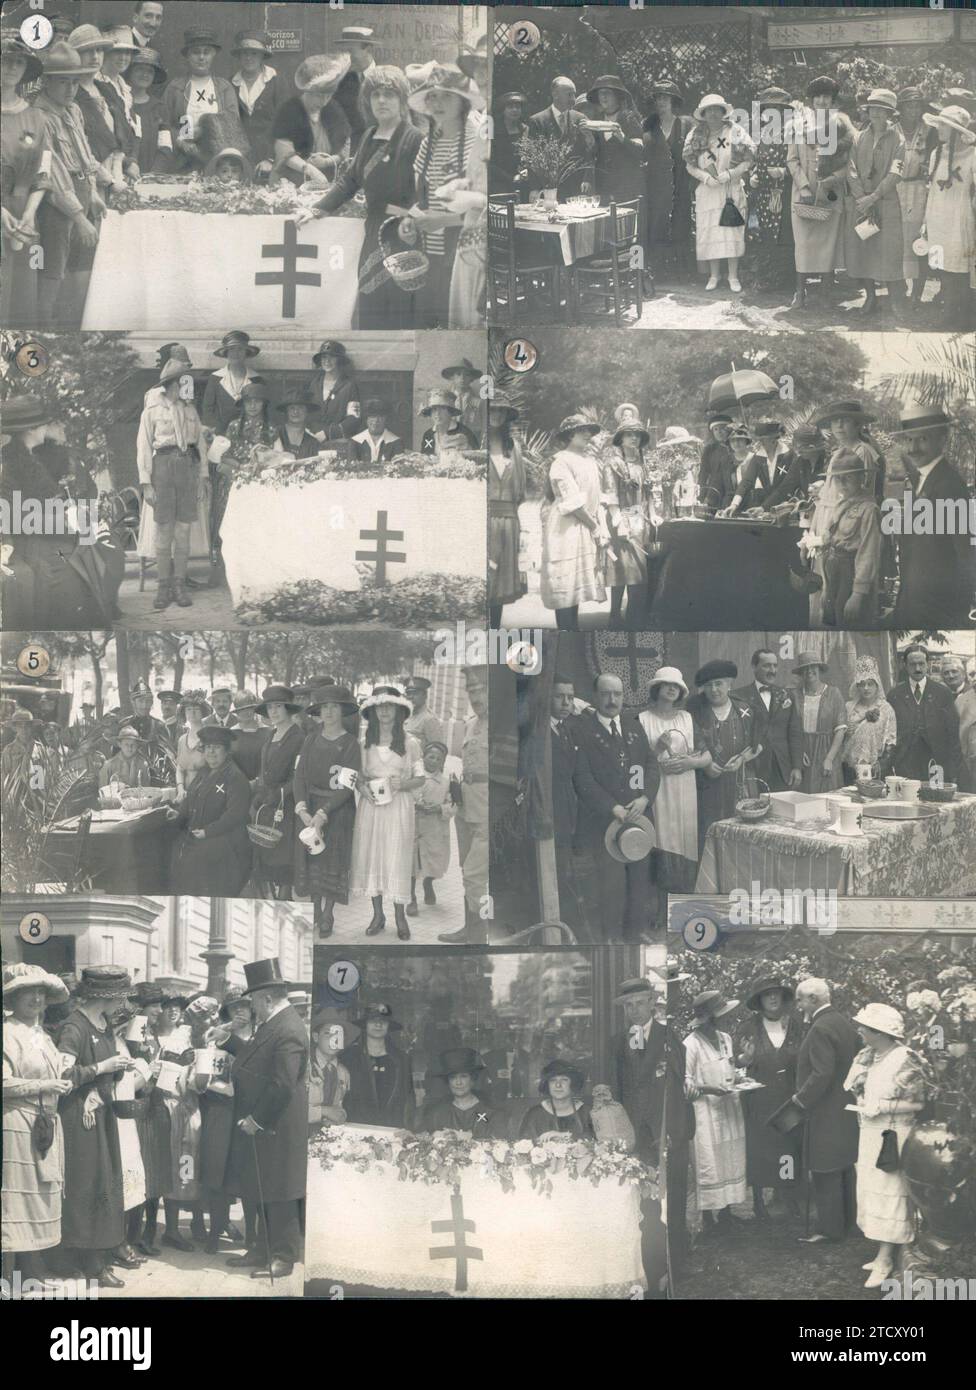 05/31/1919. From the flower festival in Madrid. 1.-position of the Countess of Romanones (X). 2.-of the Marchioness of Urquijo (X).3.-of the Marchioness of Villabragima (X). 4.-of the Marchioness of Comillas (X). 5.-of the Marchioness of Baztan (X). 6.-of the Marchioness of Al Hoceima. 7.-of the Countess of San Luis (X). 8.-Mr. La Cierva, and 9, Mr. Maura, Delivering his donation. Credit: Album / Archivo ABC / Julio Duque,José Zegri Stock Photo